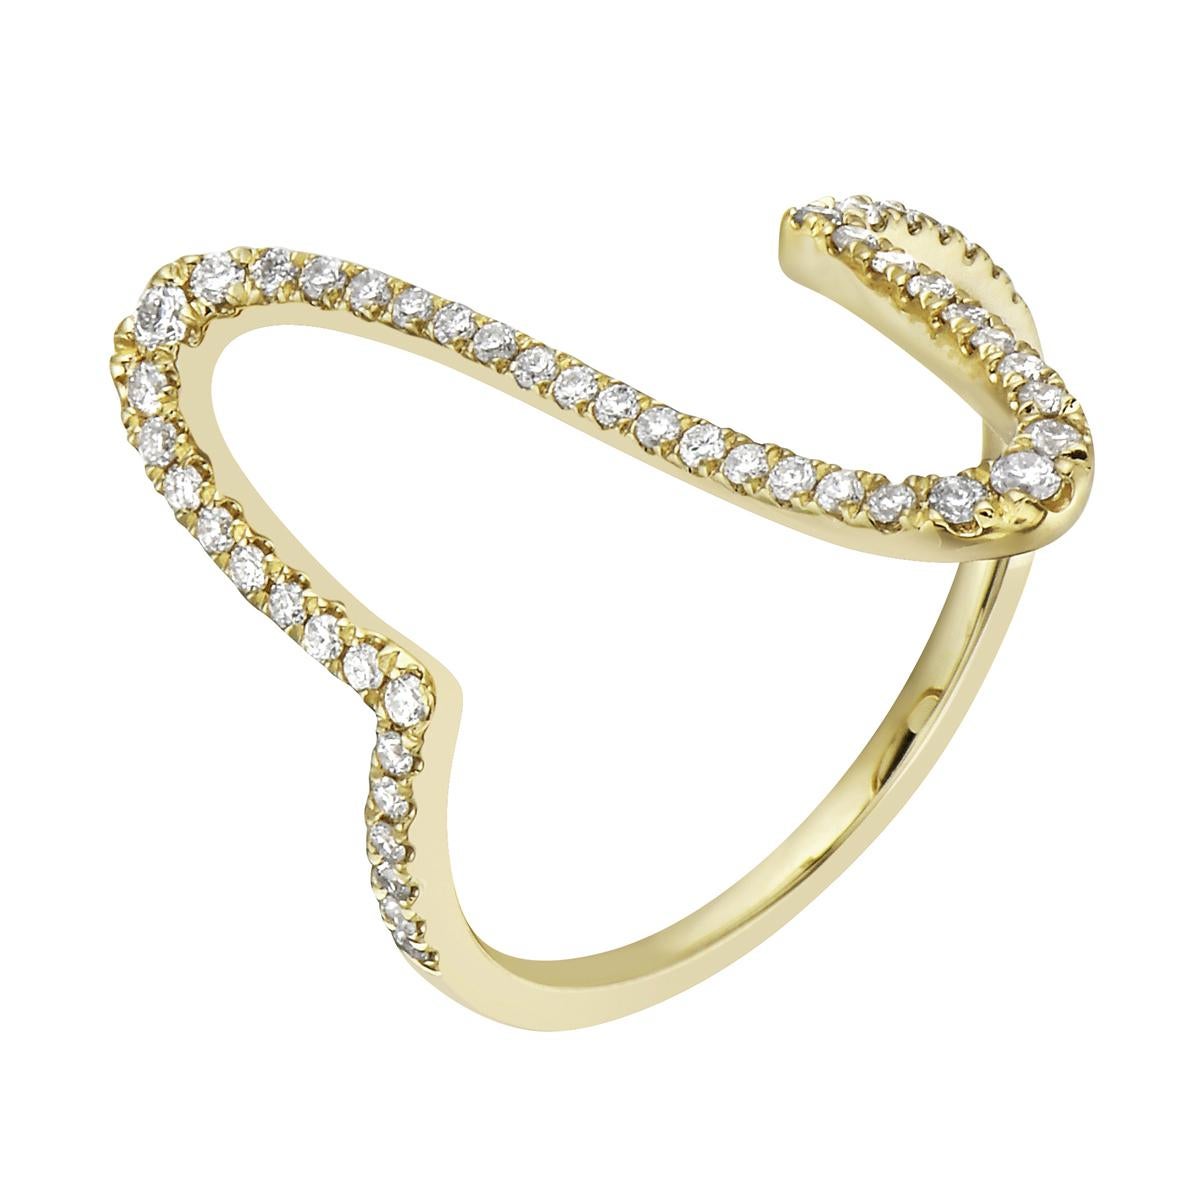 With this exquisite yellow gold diamond heartbeat ring, style and glamour are in the spotlight. This 14 karat yellow gold ring is made from 1.9 grams of gold and is covered in 49 round SI1-SI2, GH color diamonds totaling 0.28ct. This ring is size